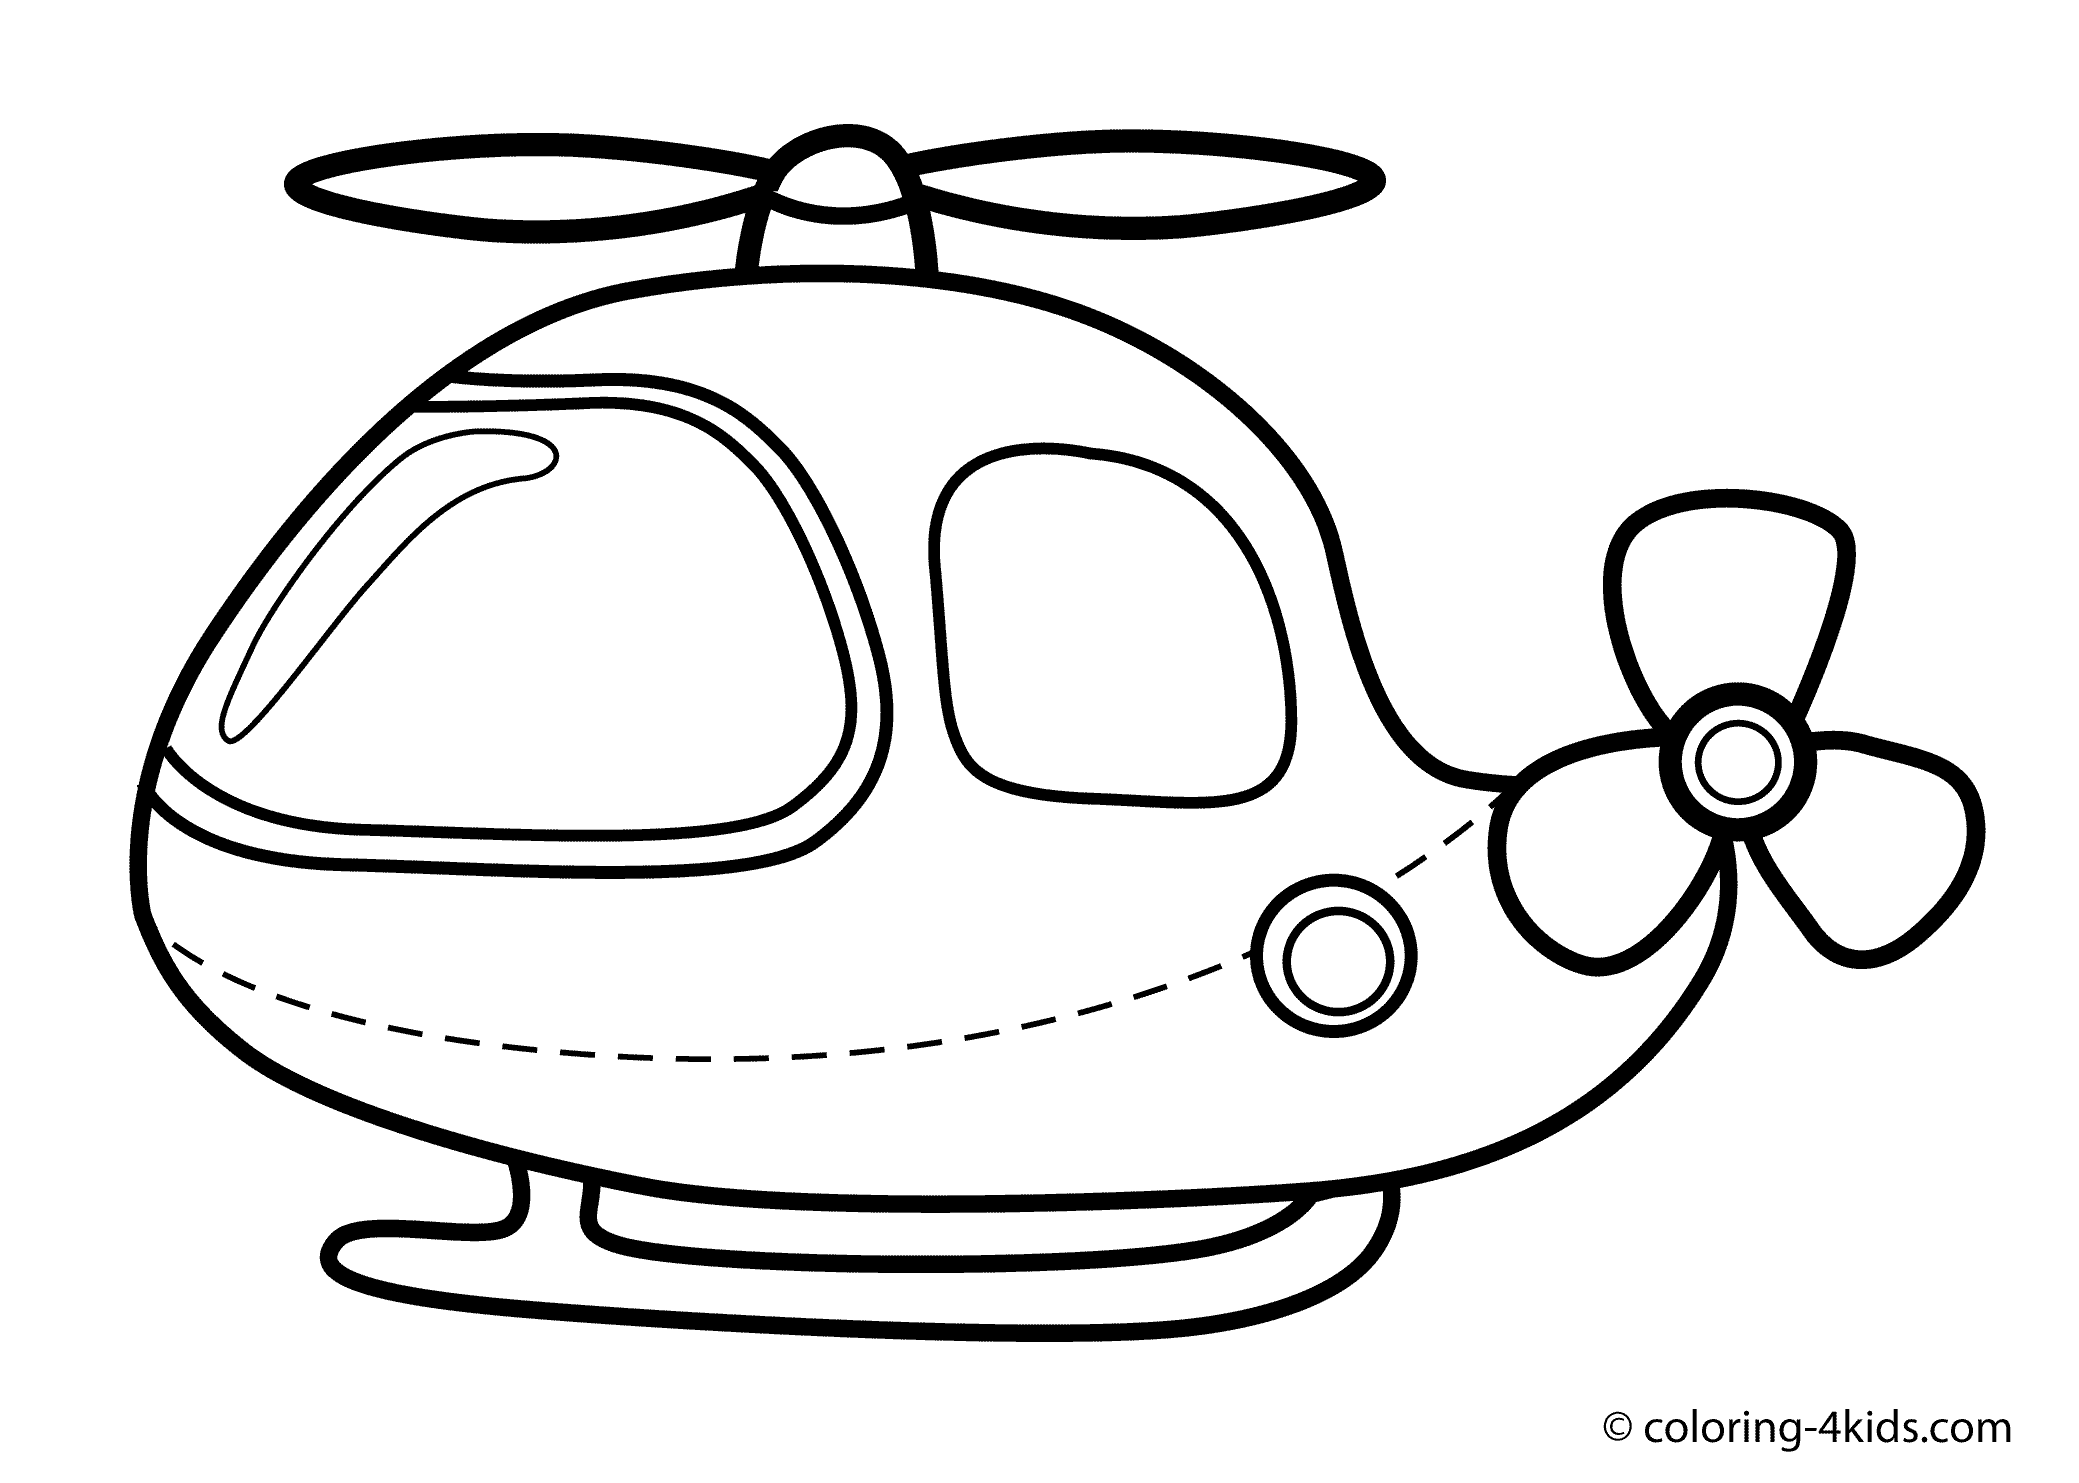 colour by number helicopter free printable helicopter coloring pages for kids number colour by helicopter 